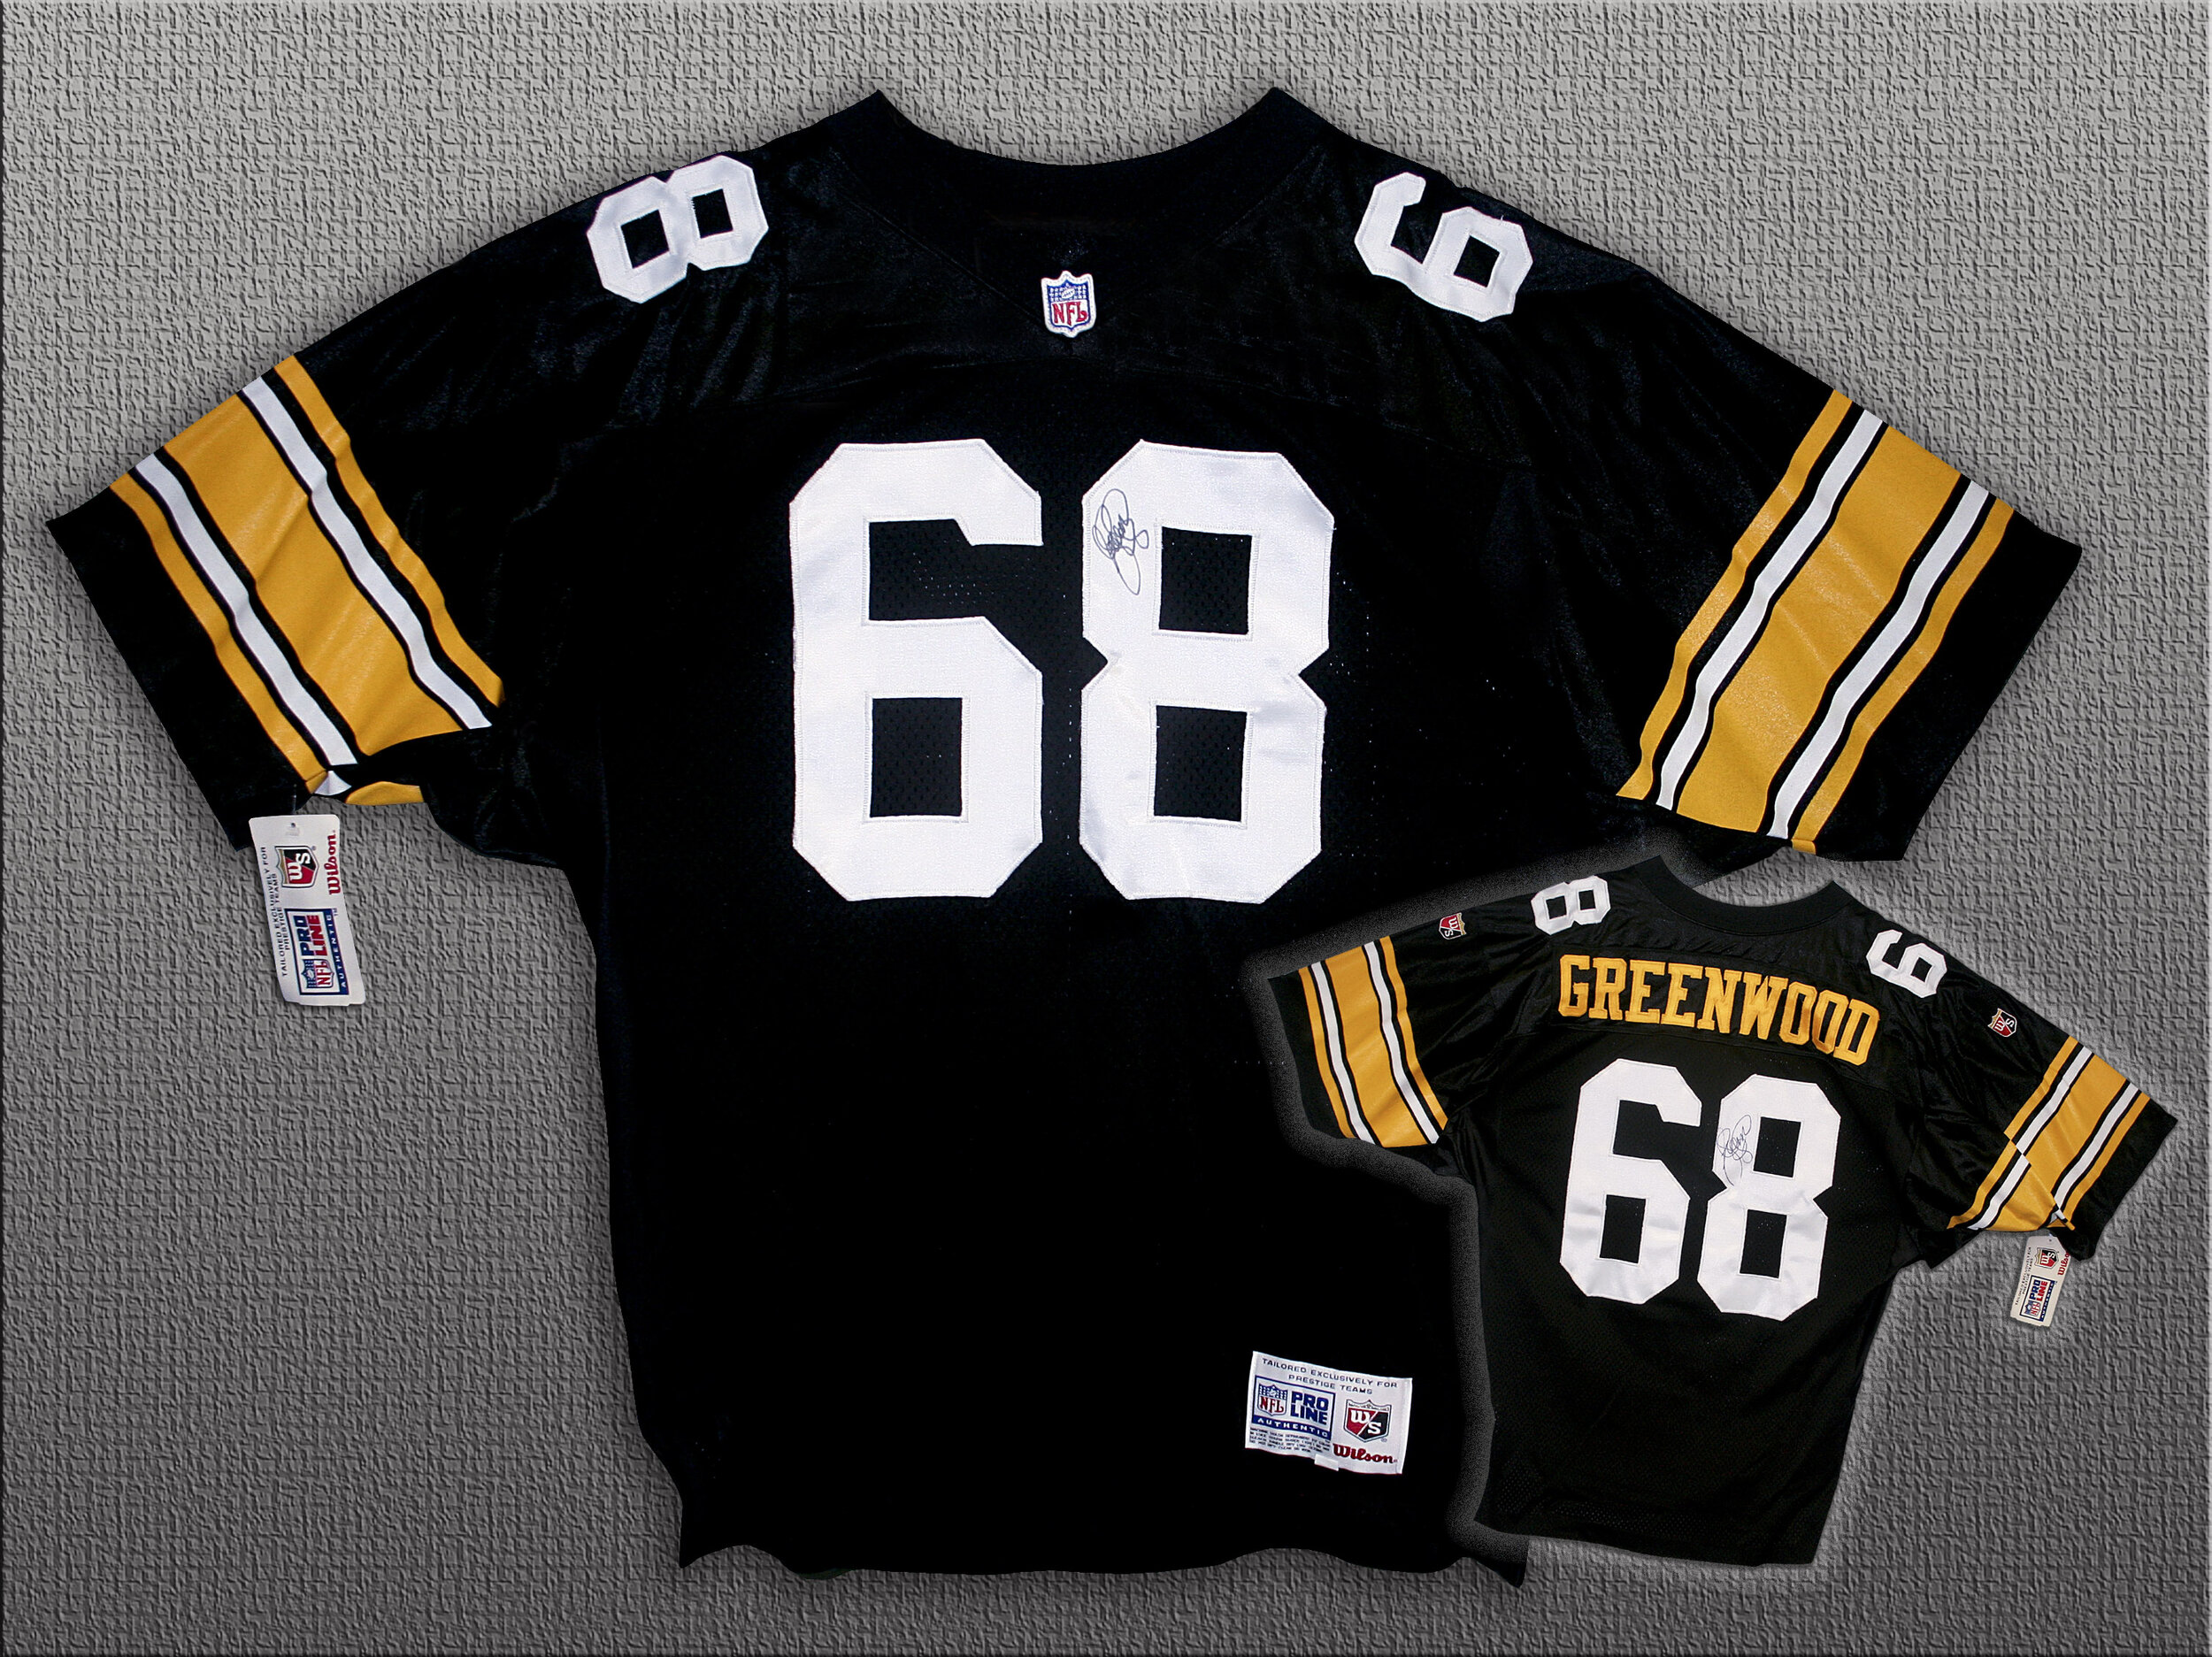 steelers authentic game jersey